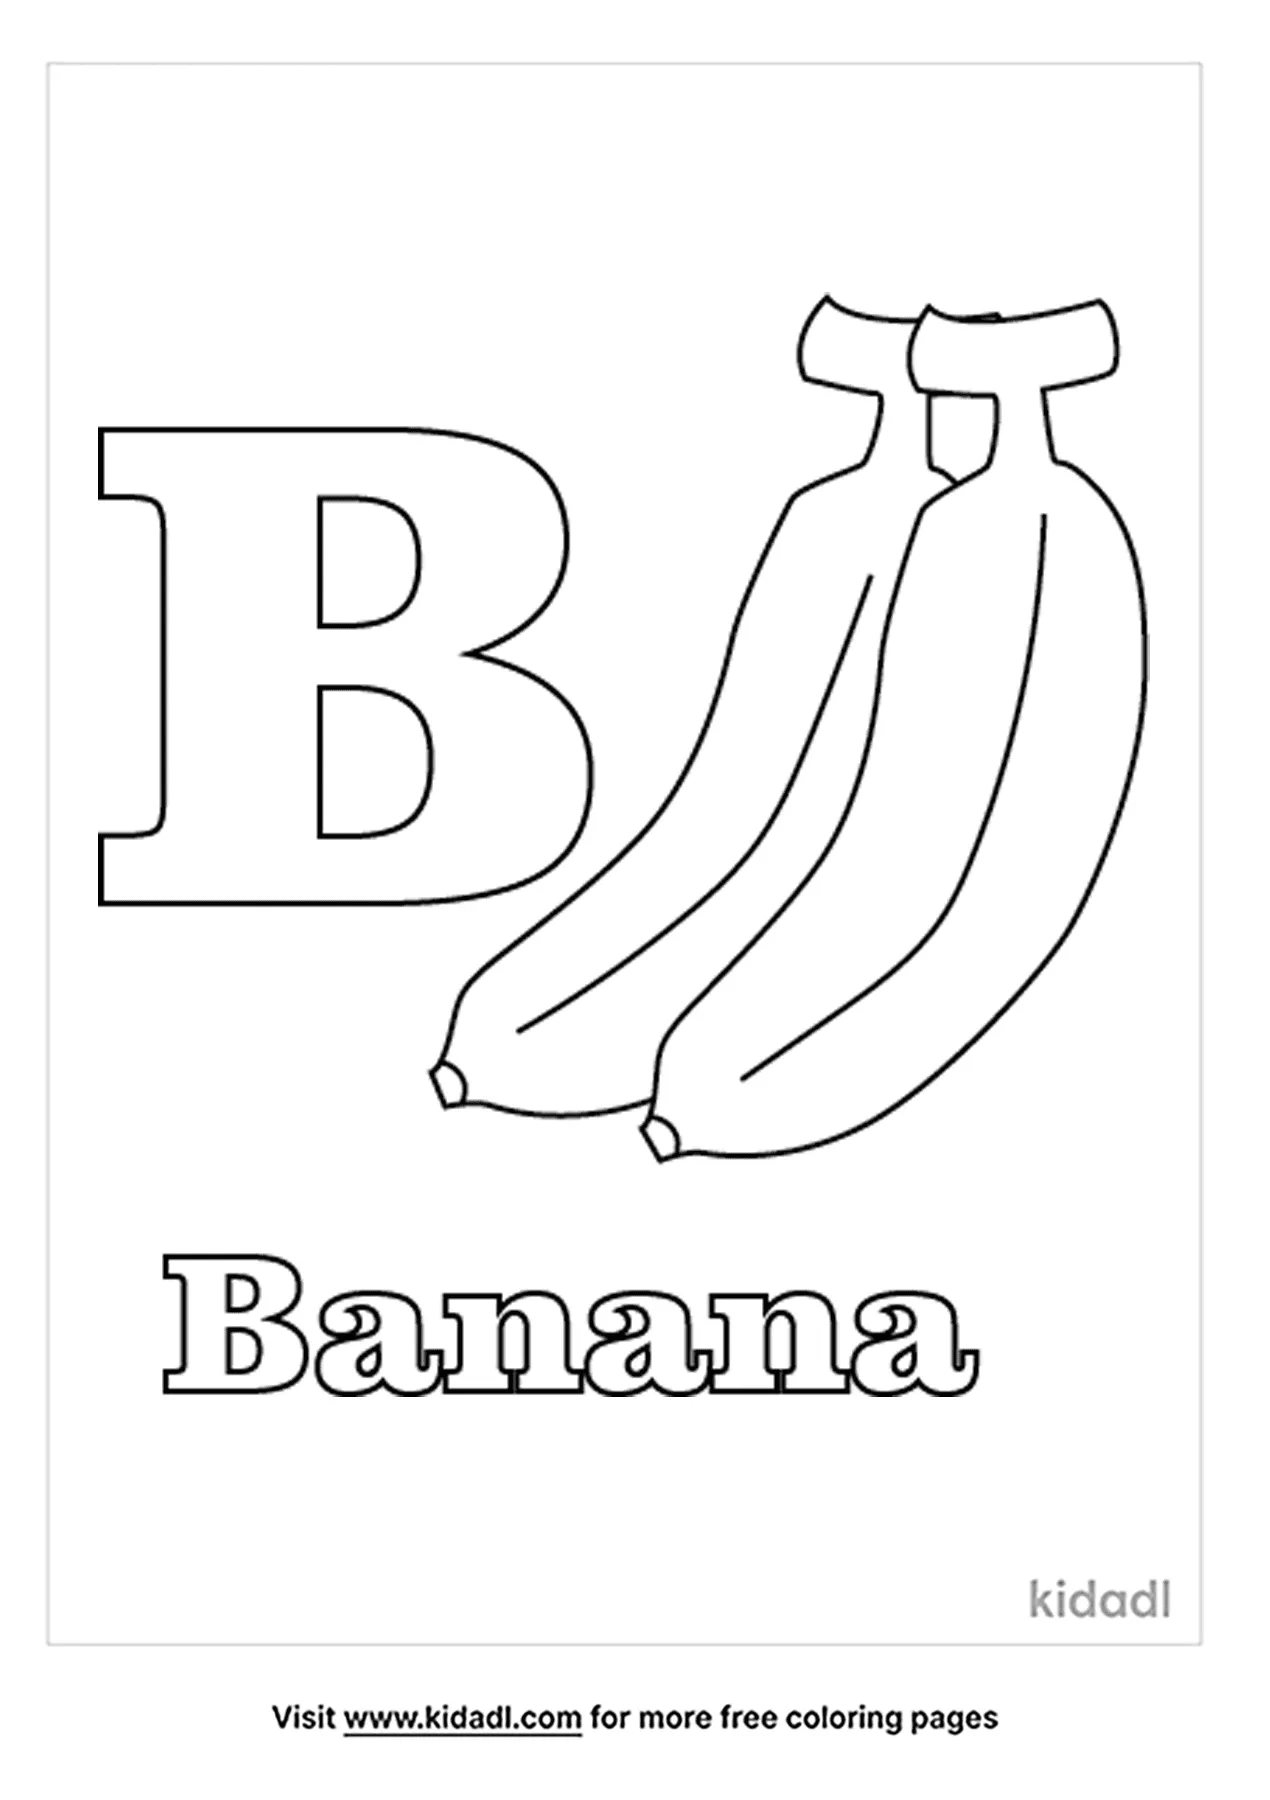 The Letter B Is For Banana Coloring Page With Dots On - vrogue.co